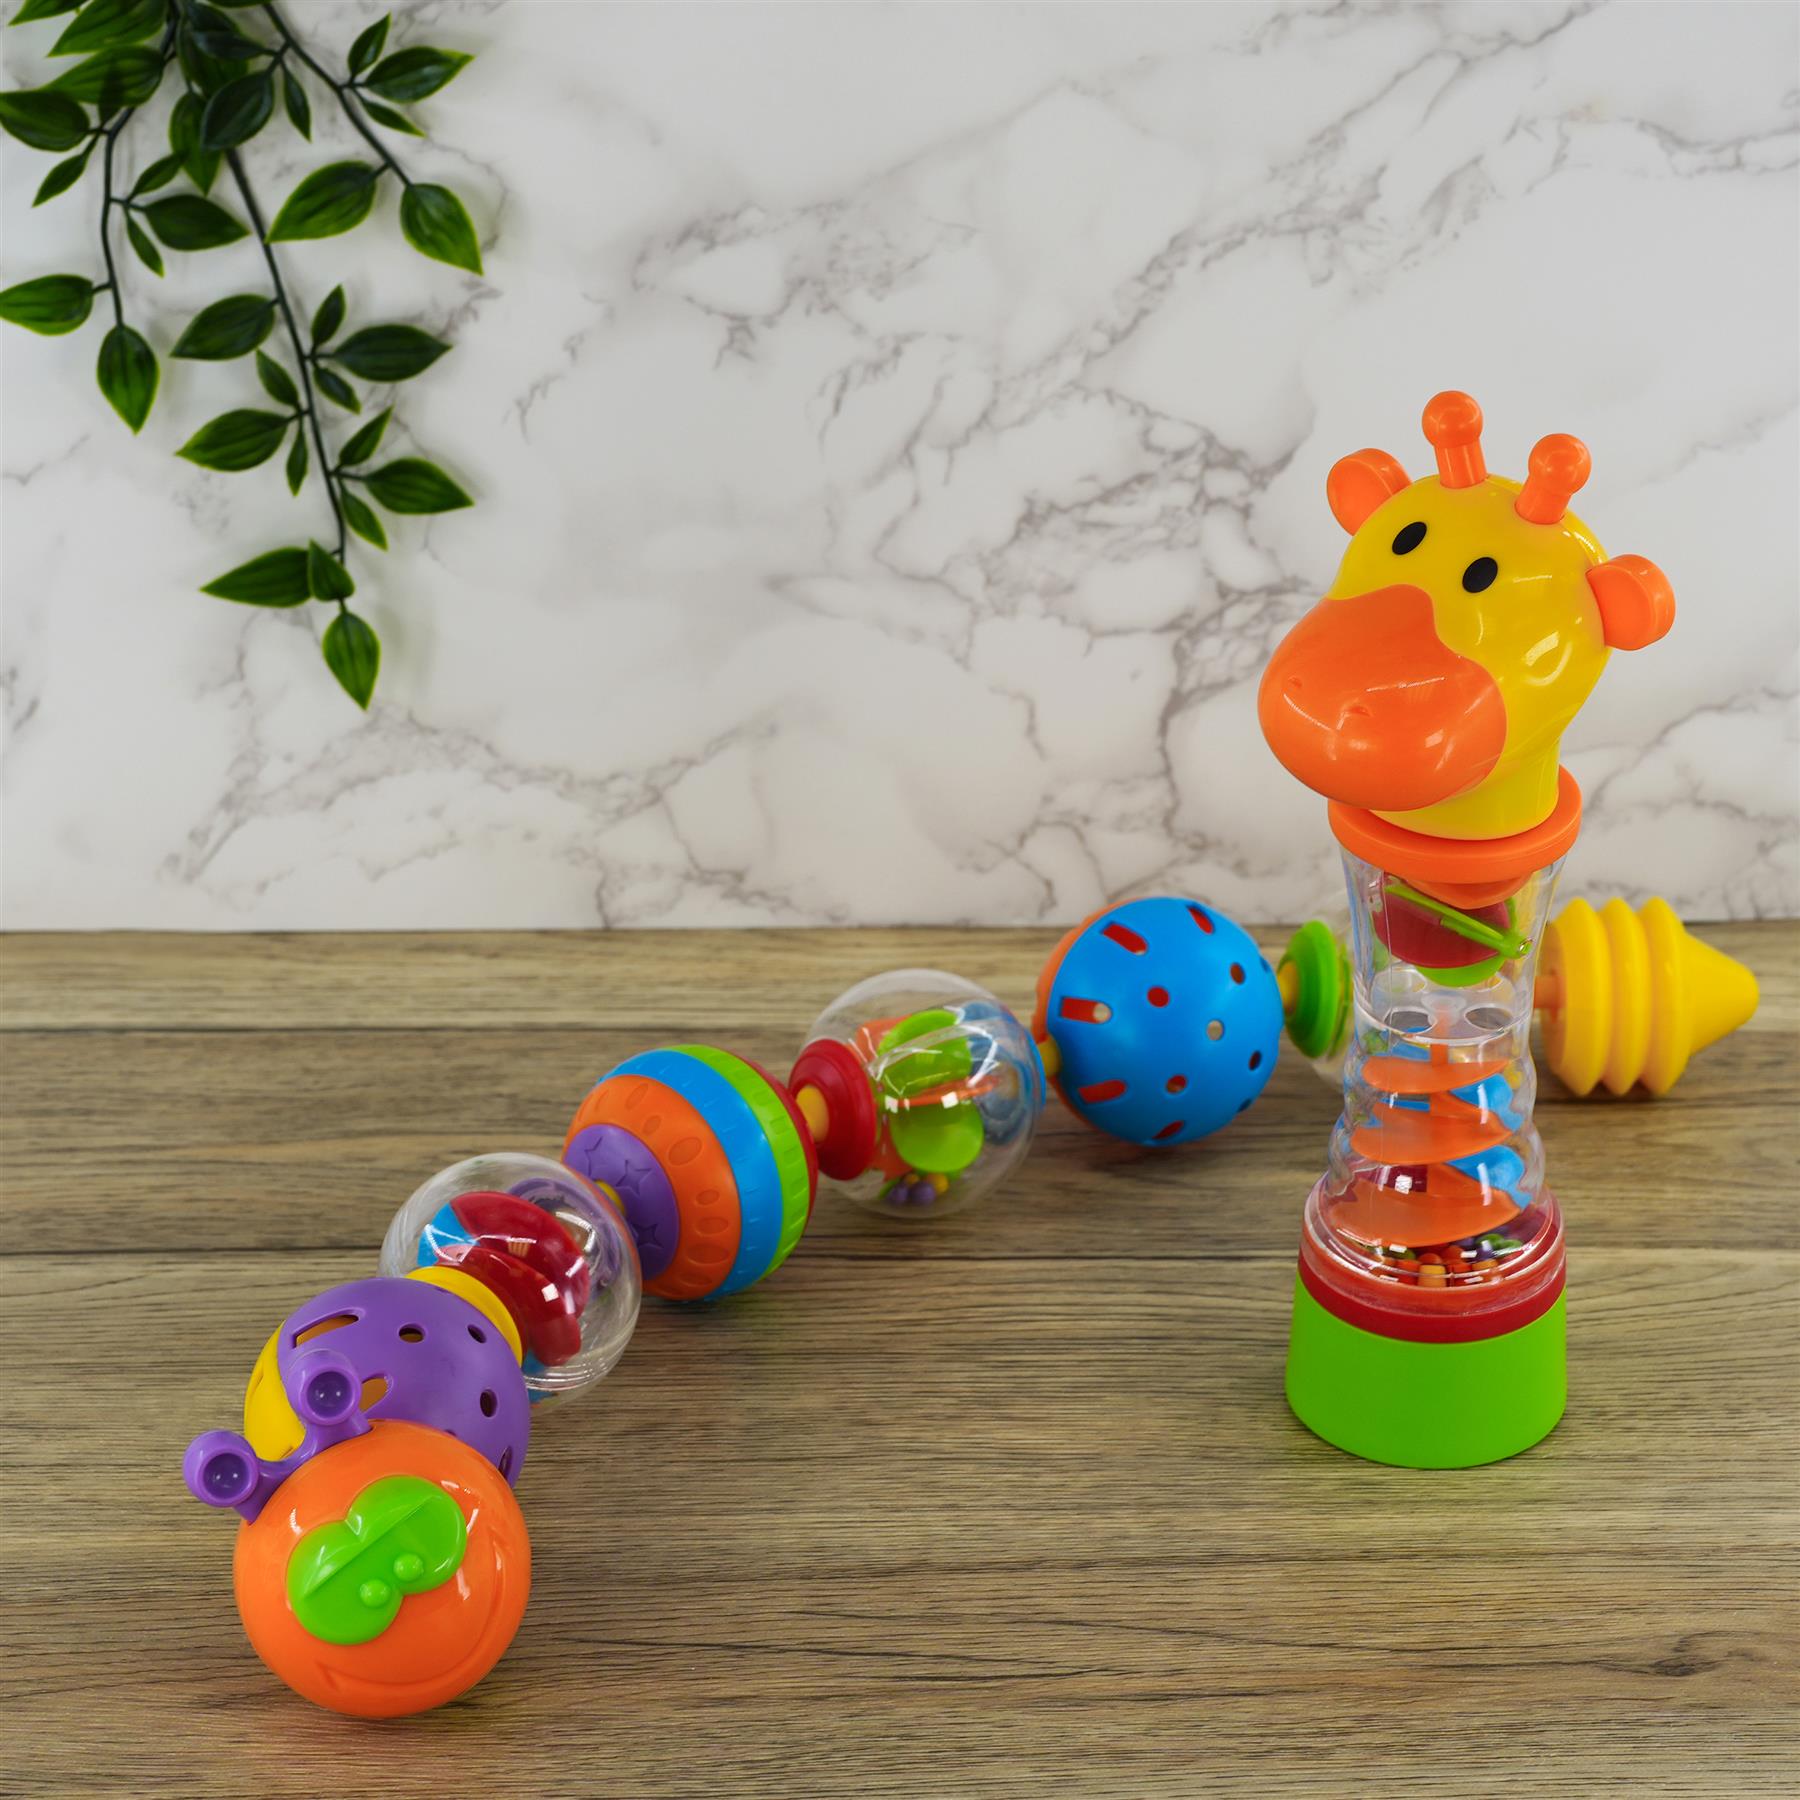 The Magic Toy Shop Toy Spin & Roll Gift Set with Fun Activates & Sound rolling spinning caterpillar